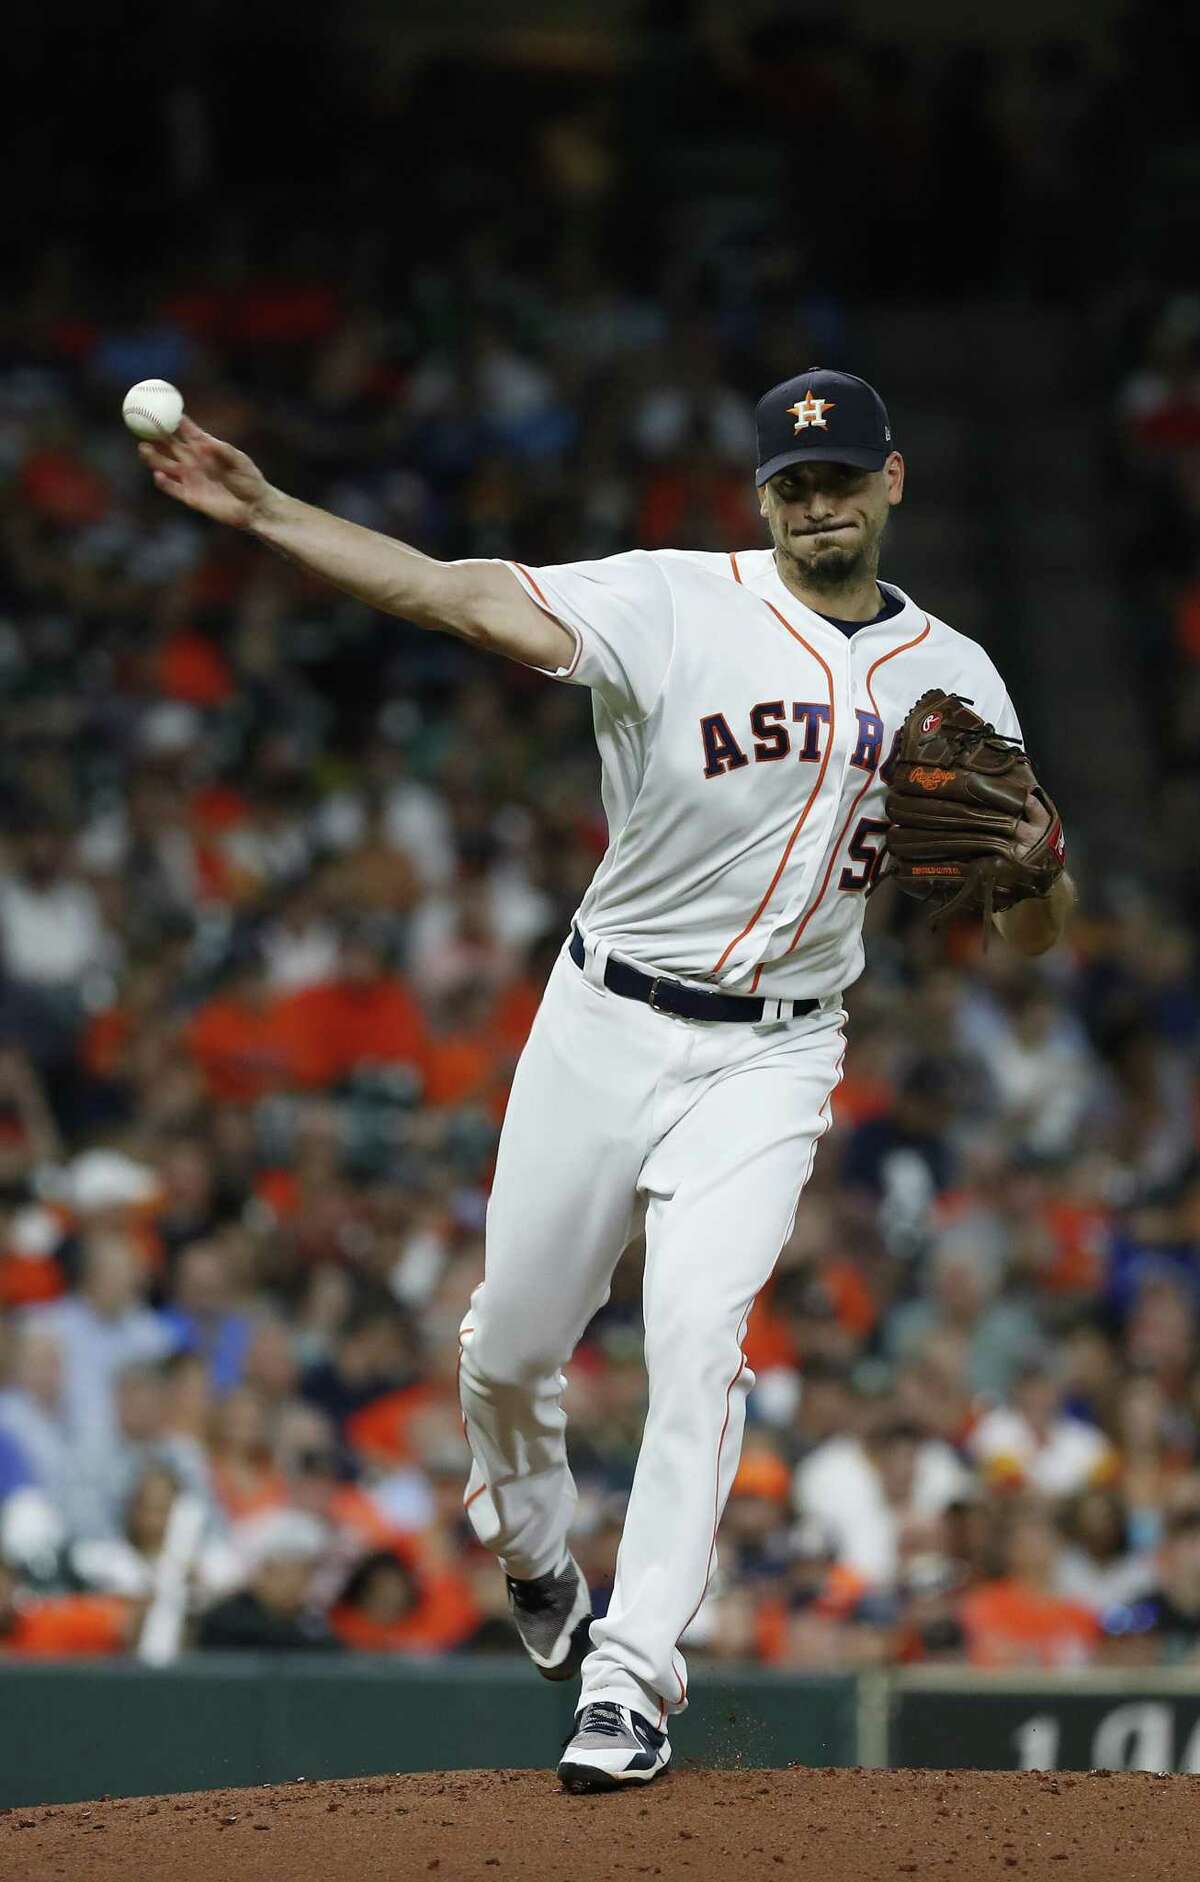 Righthanded starting pitcher Charlie Morton takes his considerable repertoire and reputation for being a good teammate to the Tampa Bay Rays.